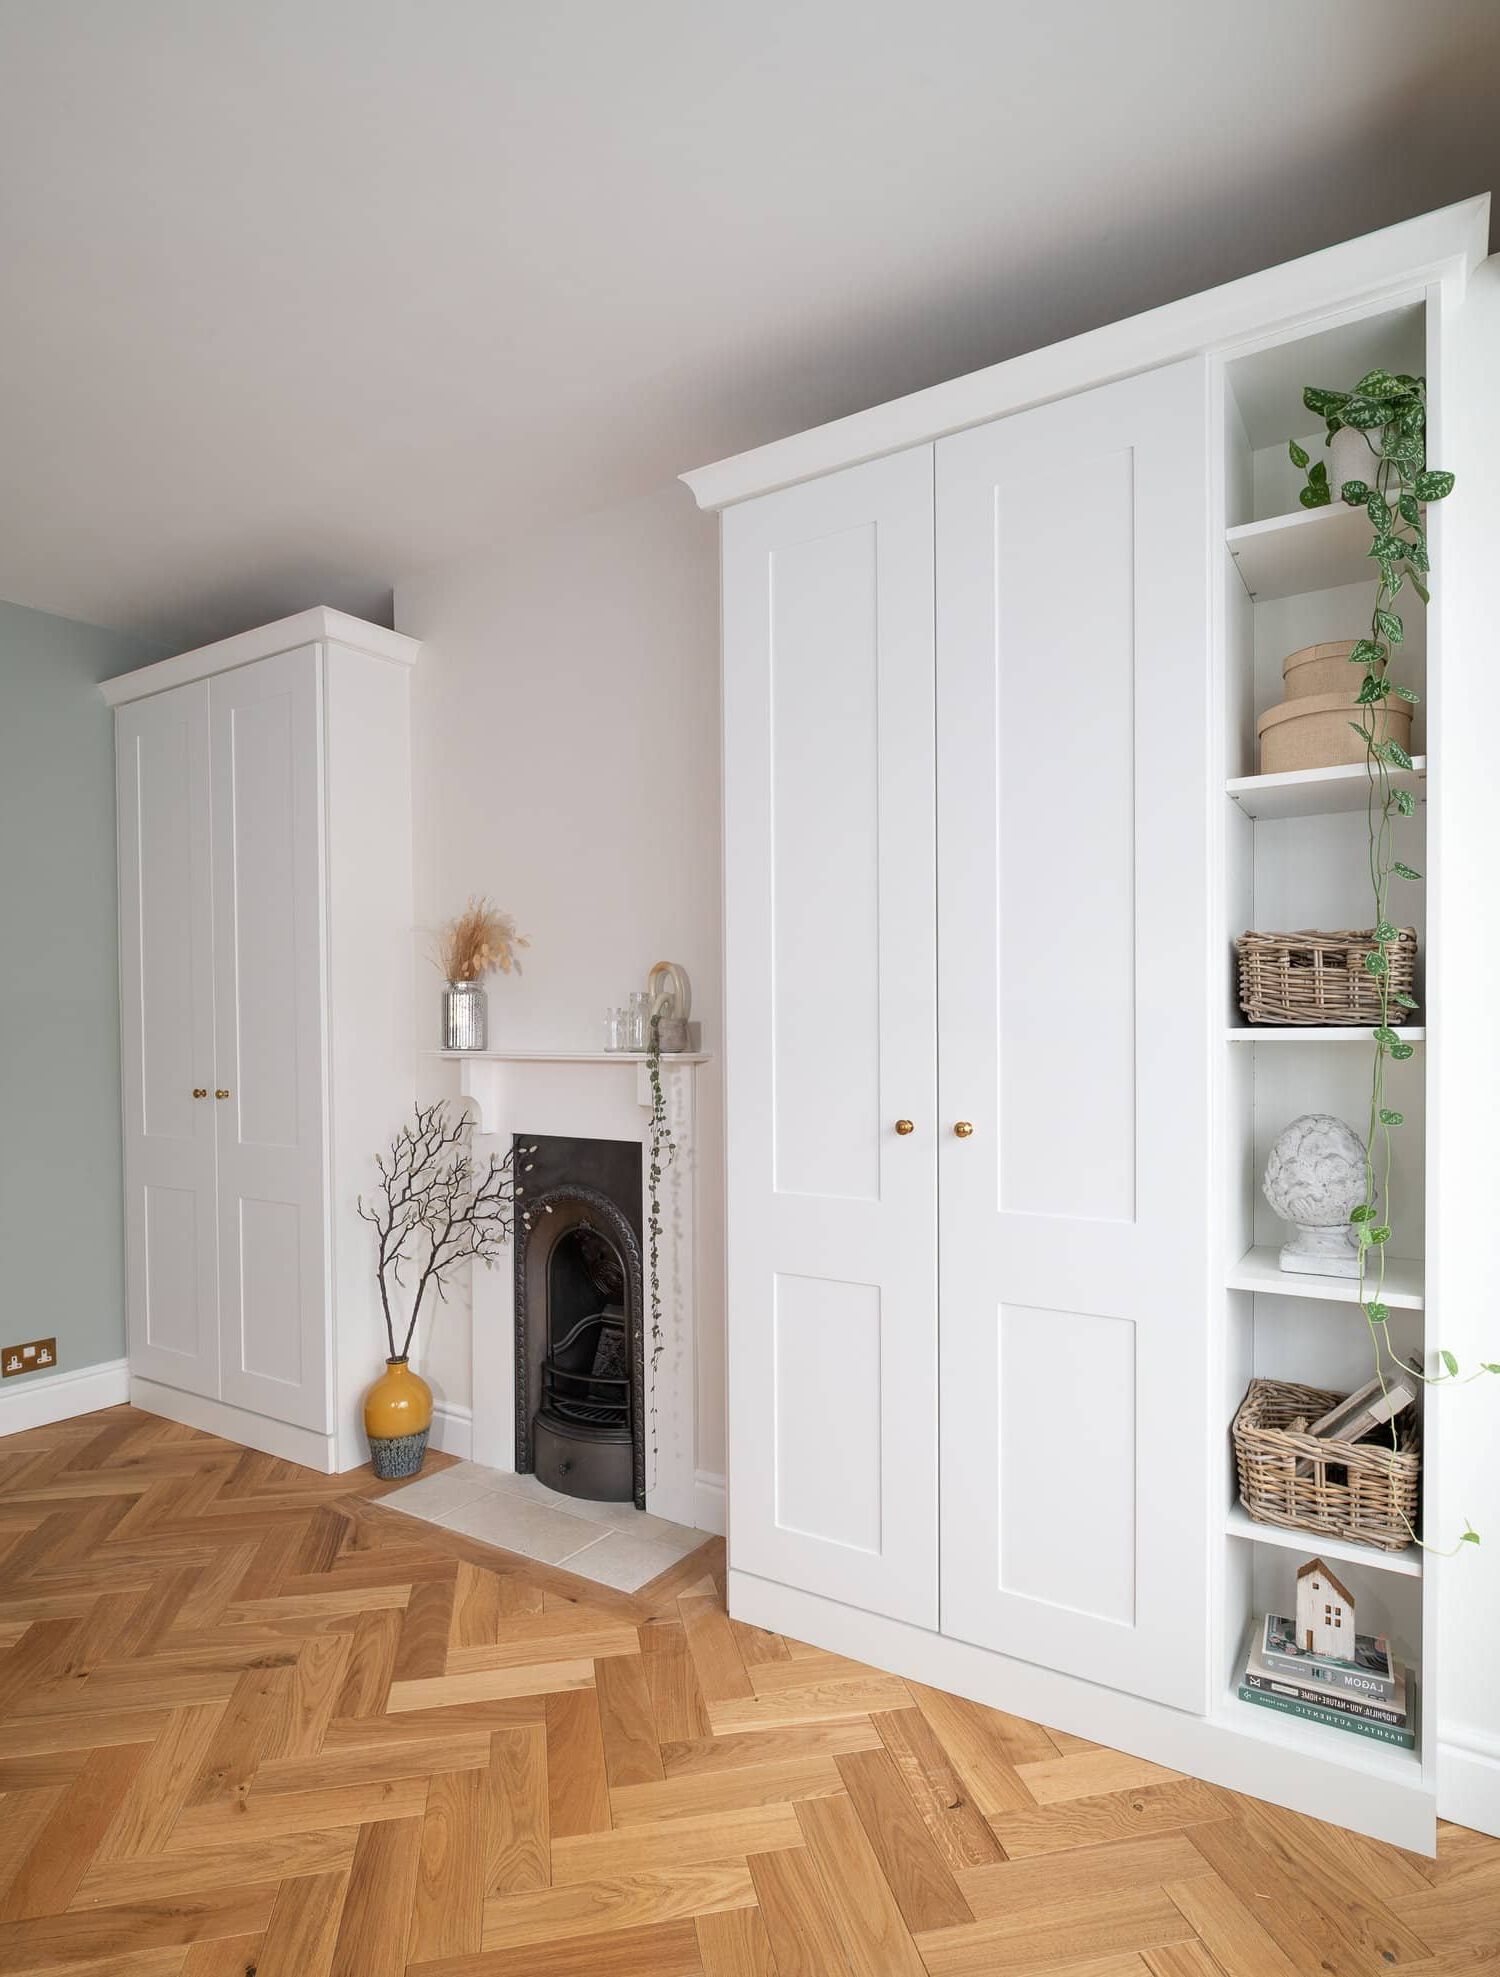 Our Alcove Fitted Wardrobes – Before + After | Fifi Mcgee In Alcove Wardrobes (Gallery 4 of 20)